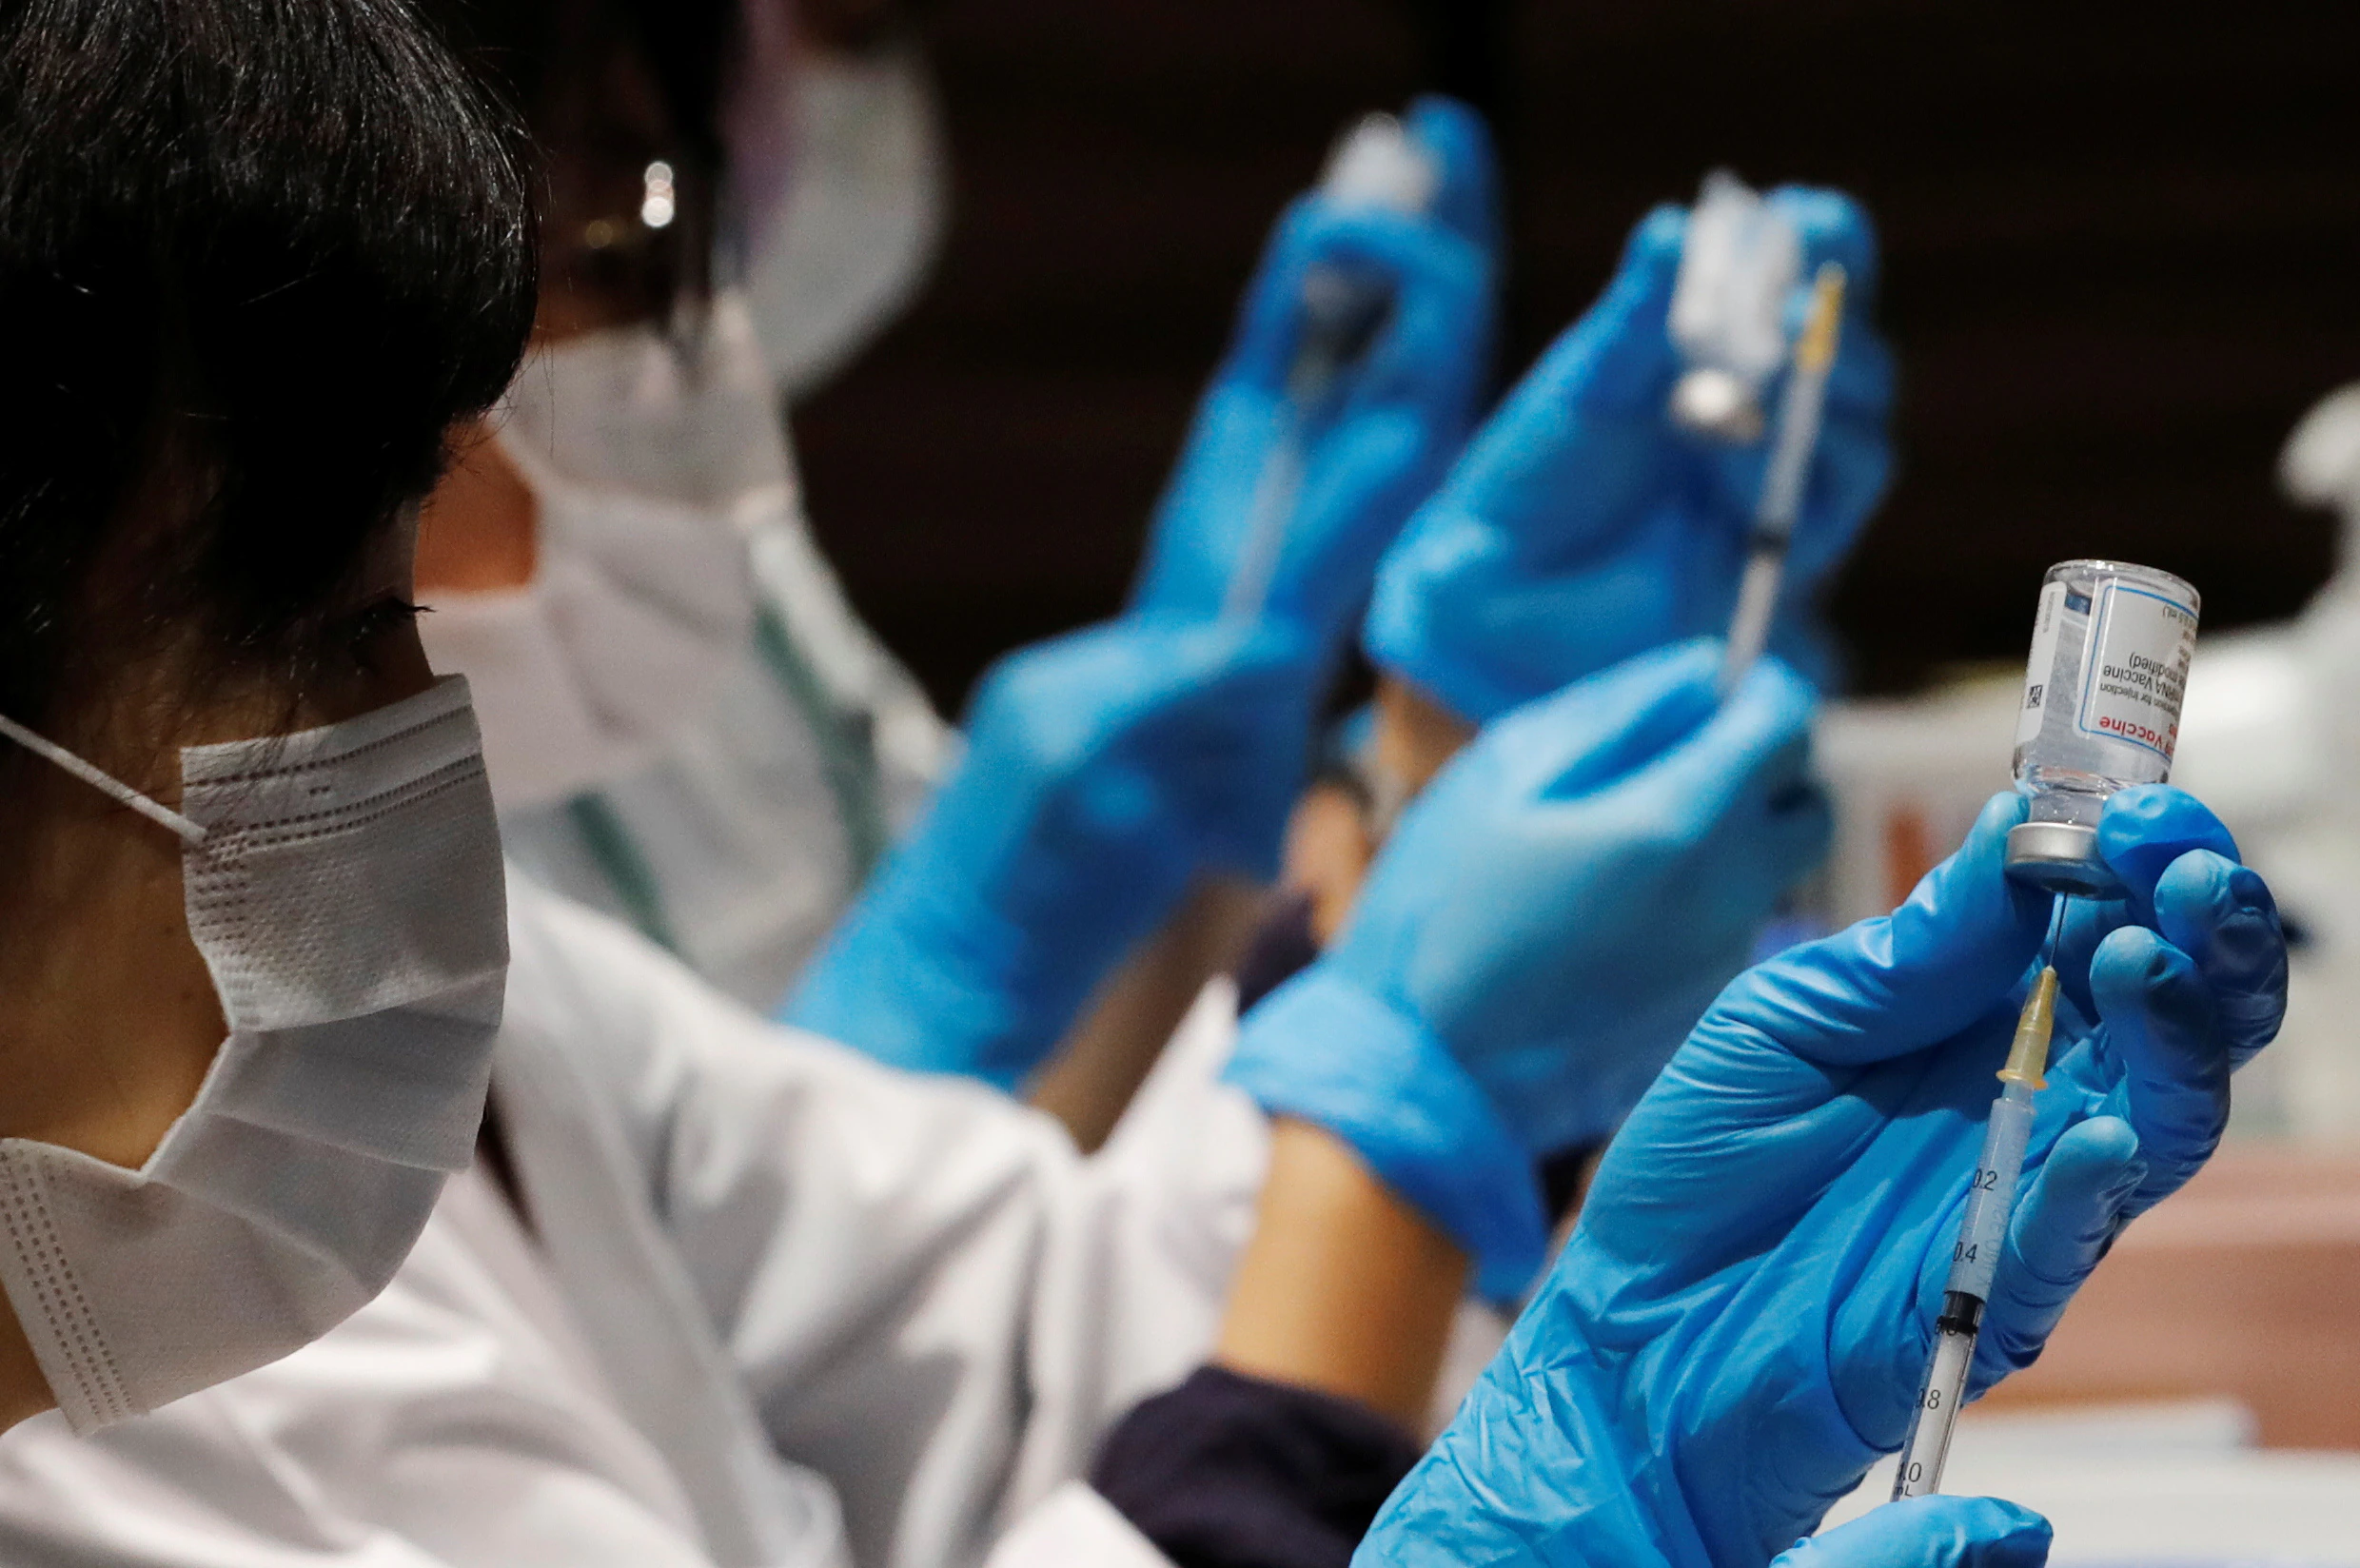 Japan Begins Workplace Vaccination Program | Voice of America